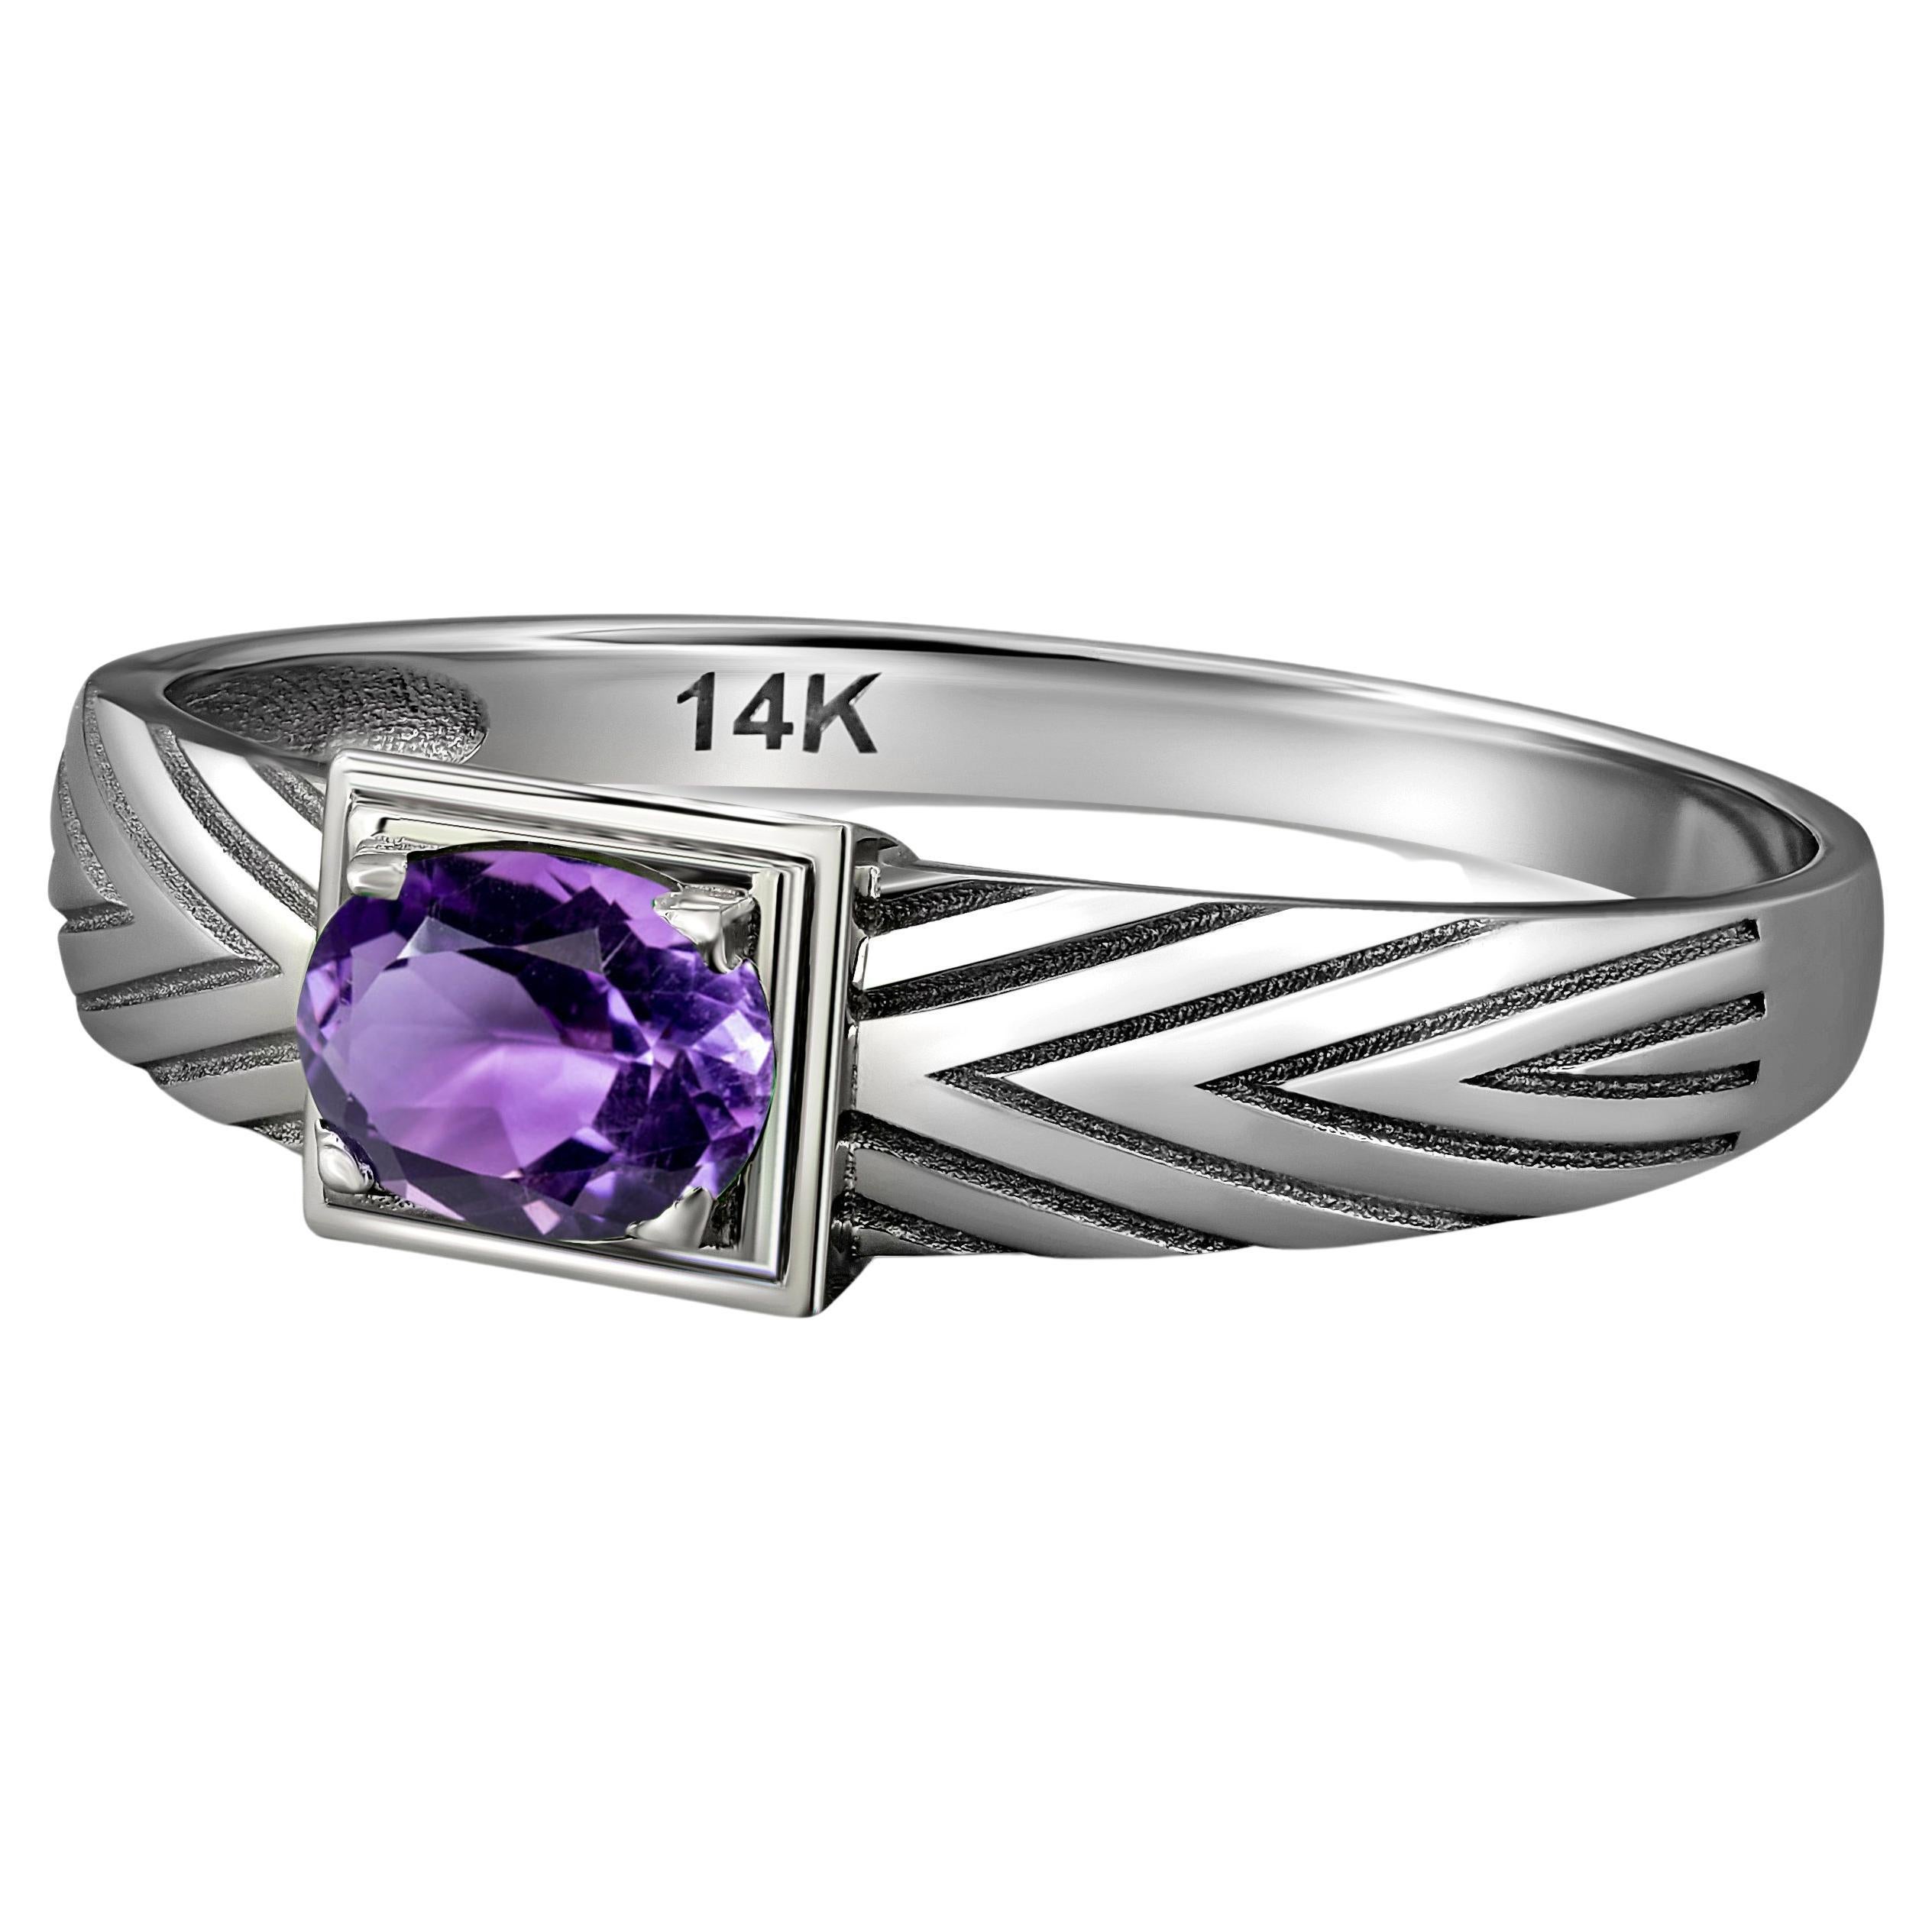 14k Gold Mens Ring with Amethyst